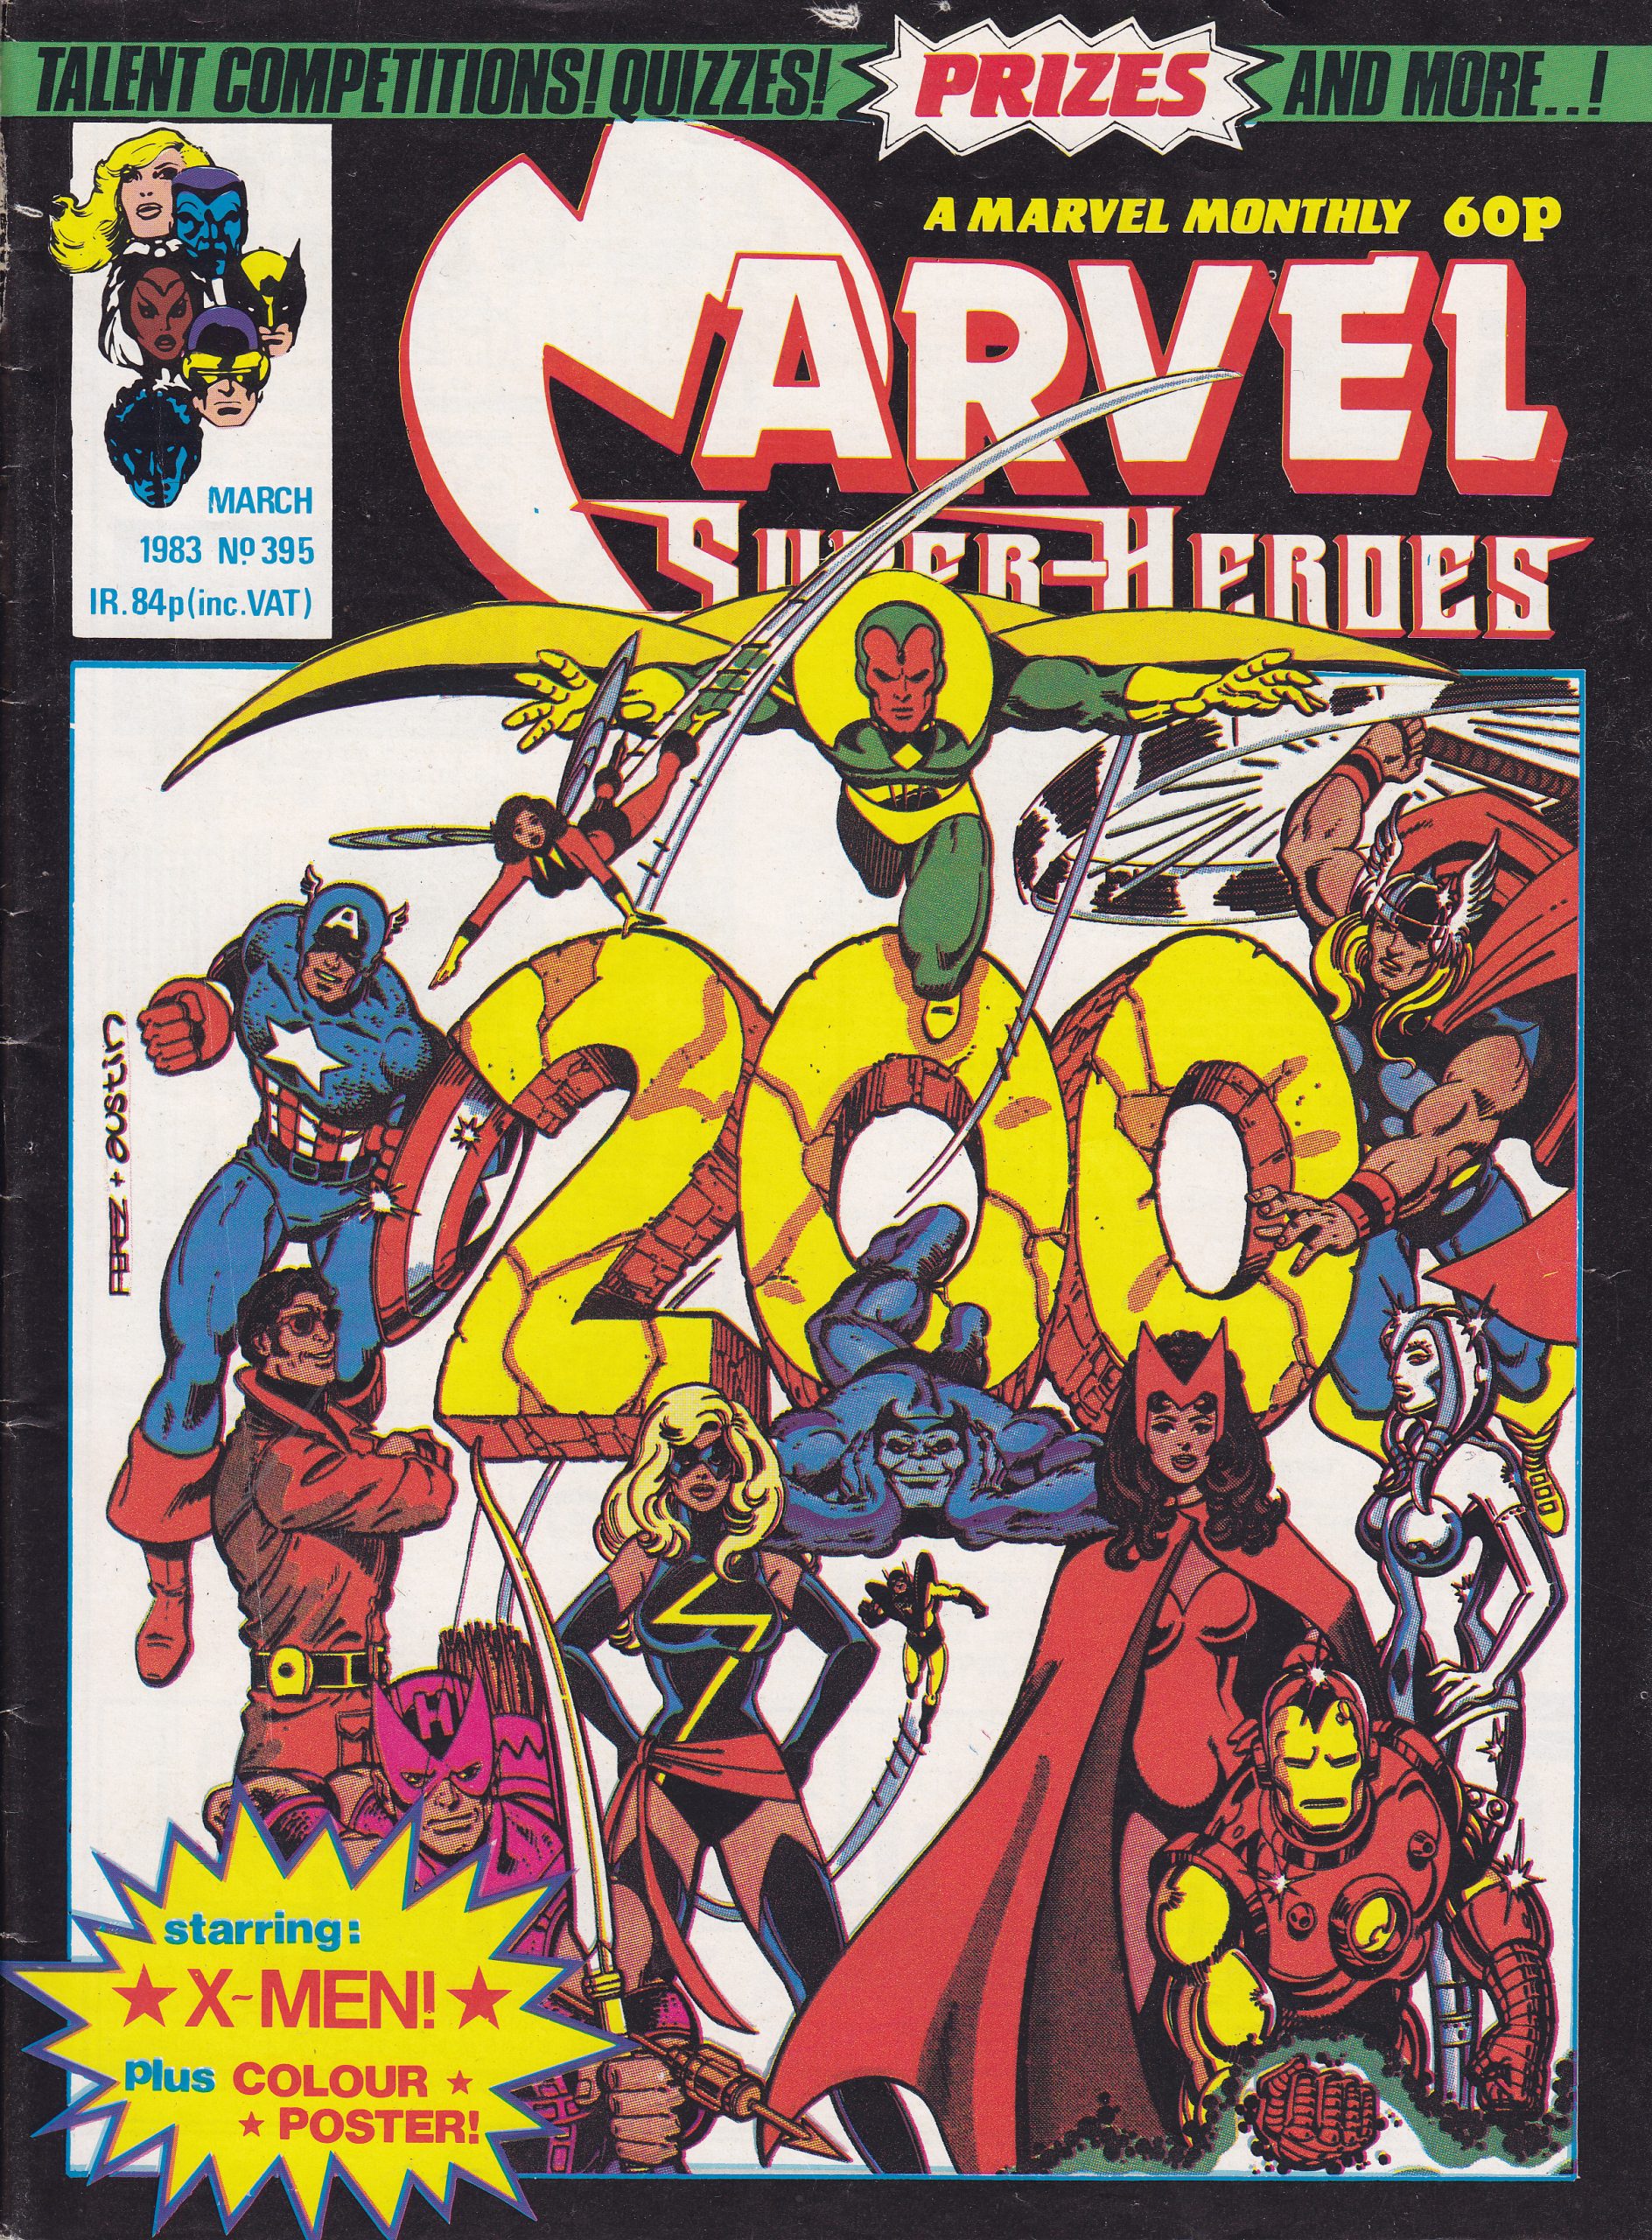 Marvel UK’s Marvel Superheroes No. 395, featuring reprinted cover art for Avengers #200 (First Series)